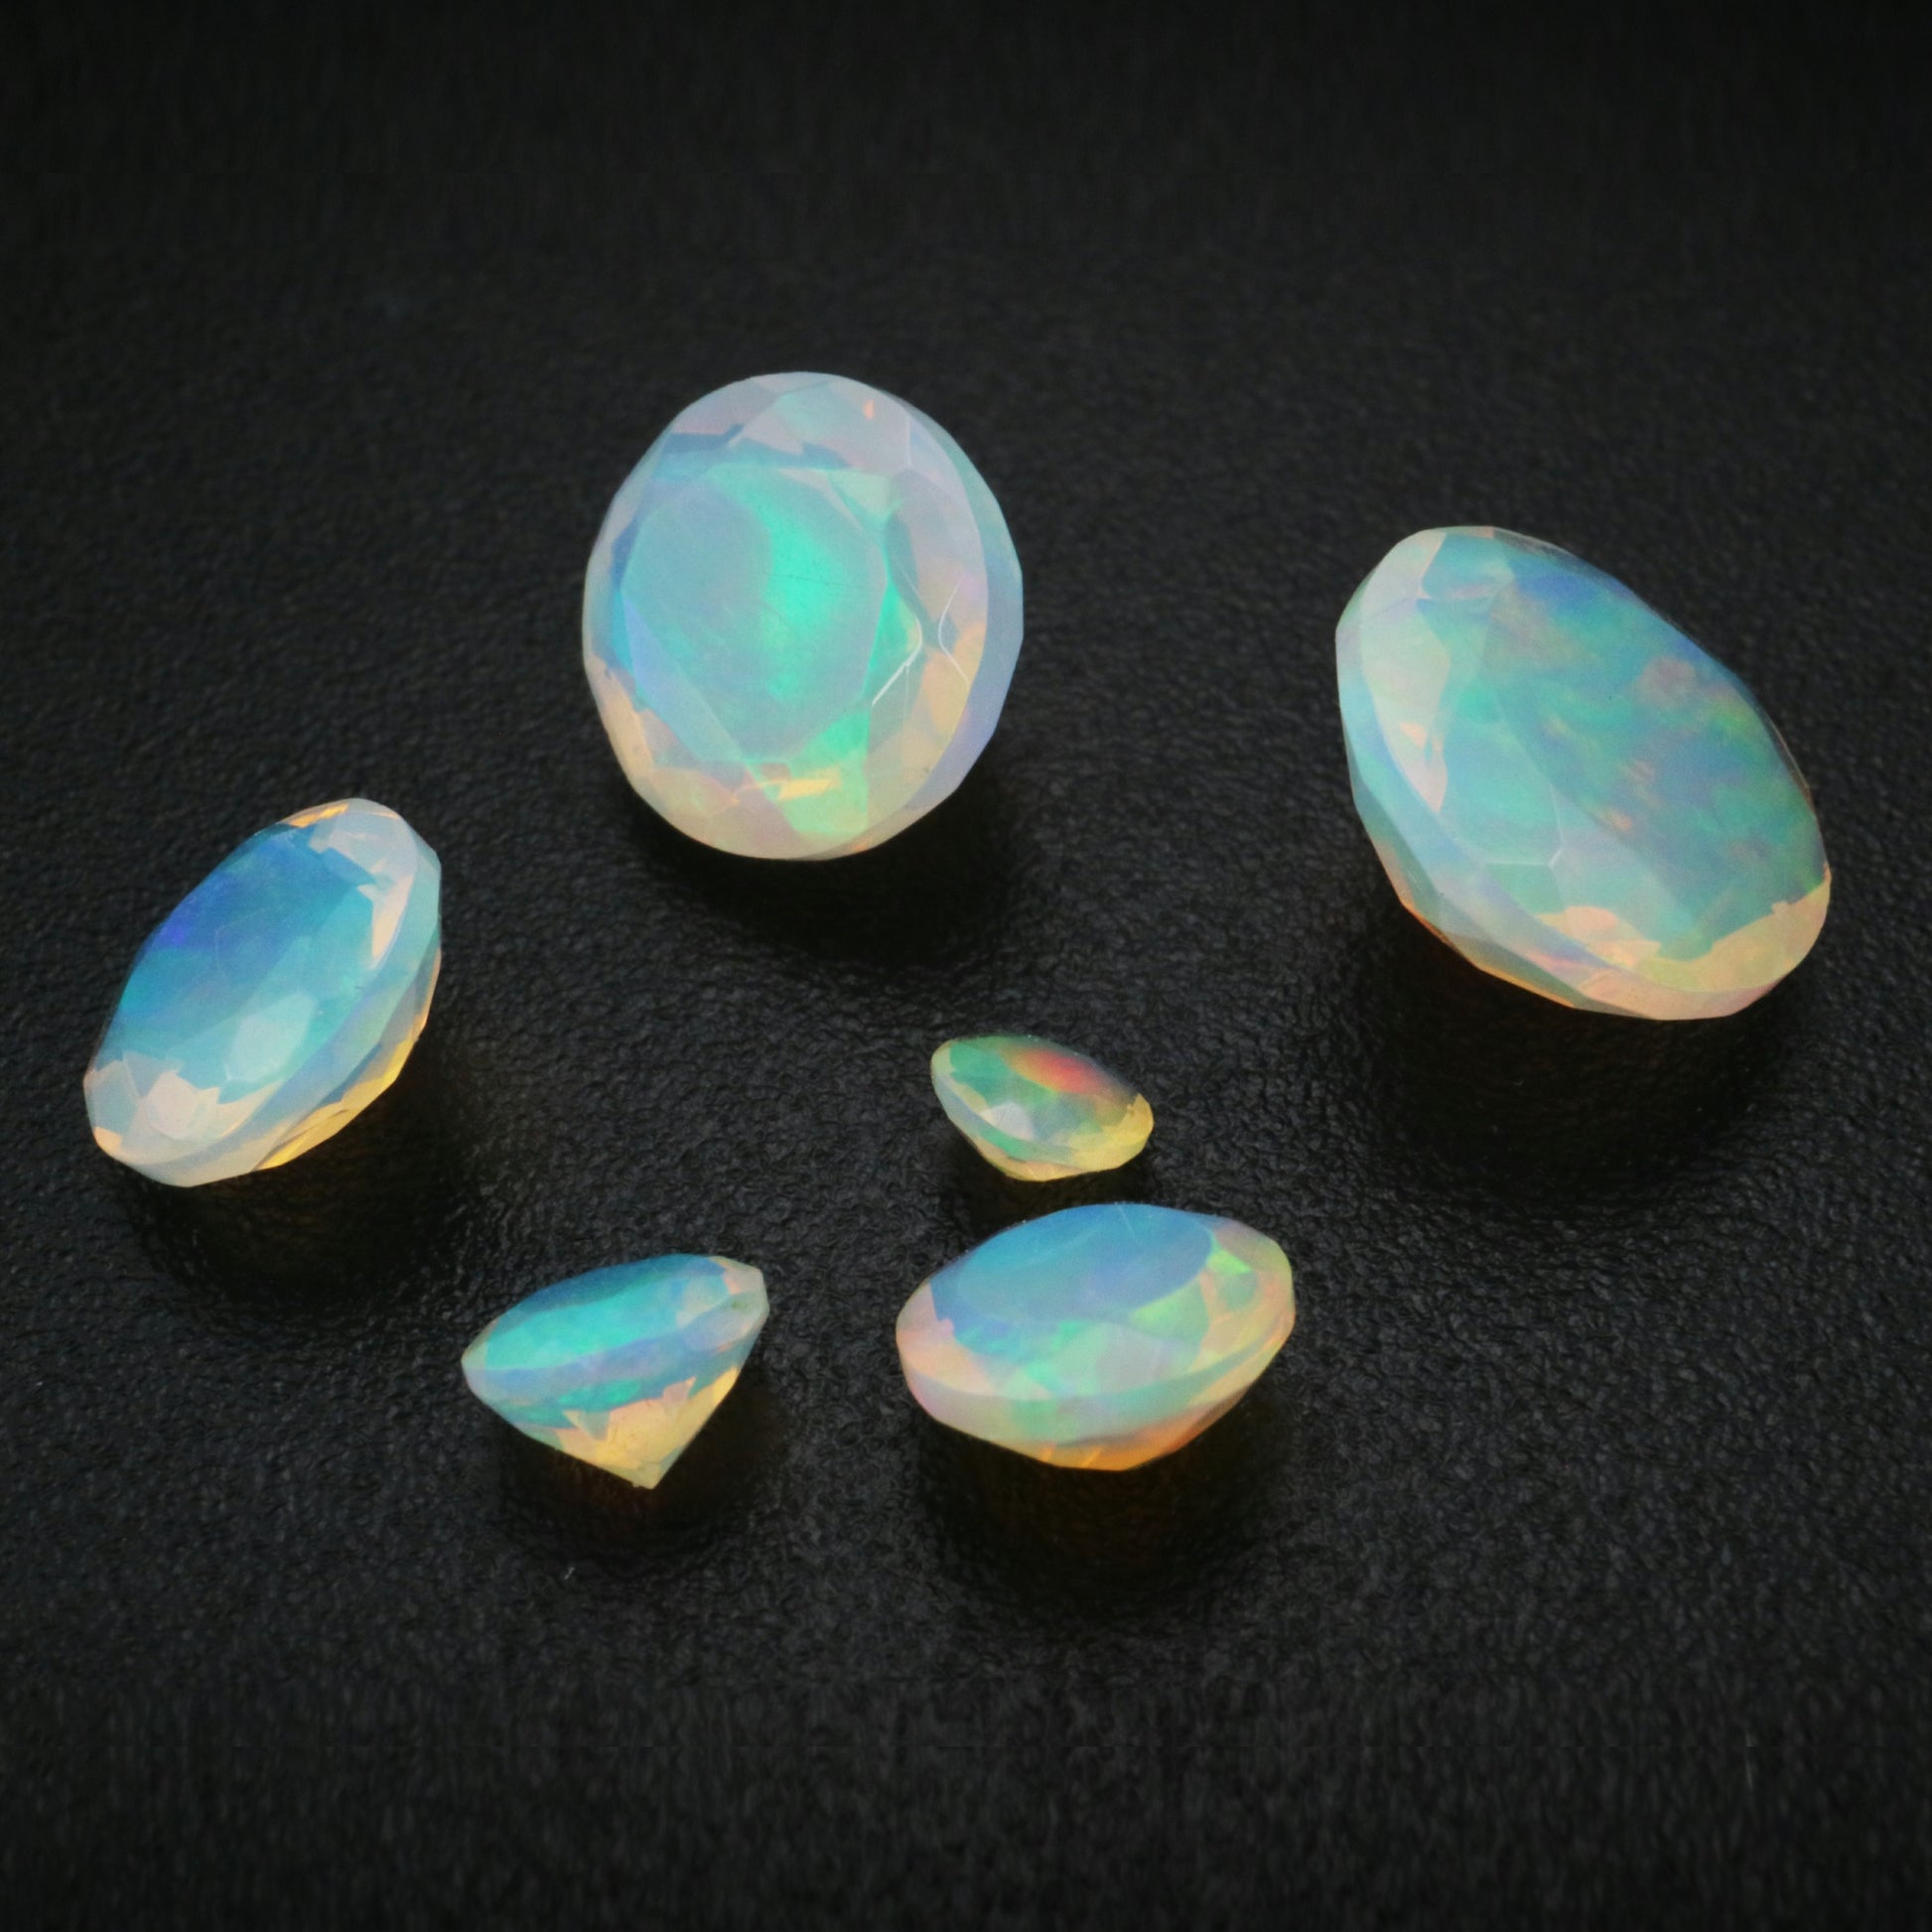 Various sizes of loose colorful opals.